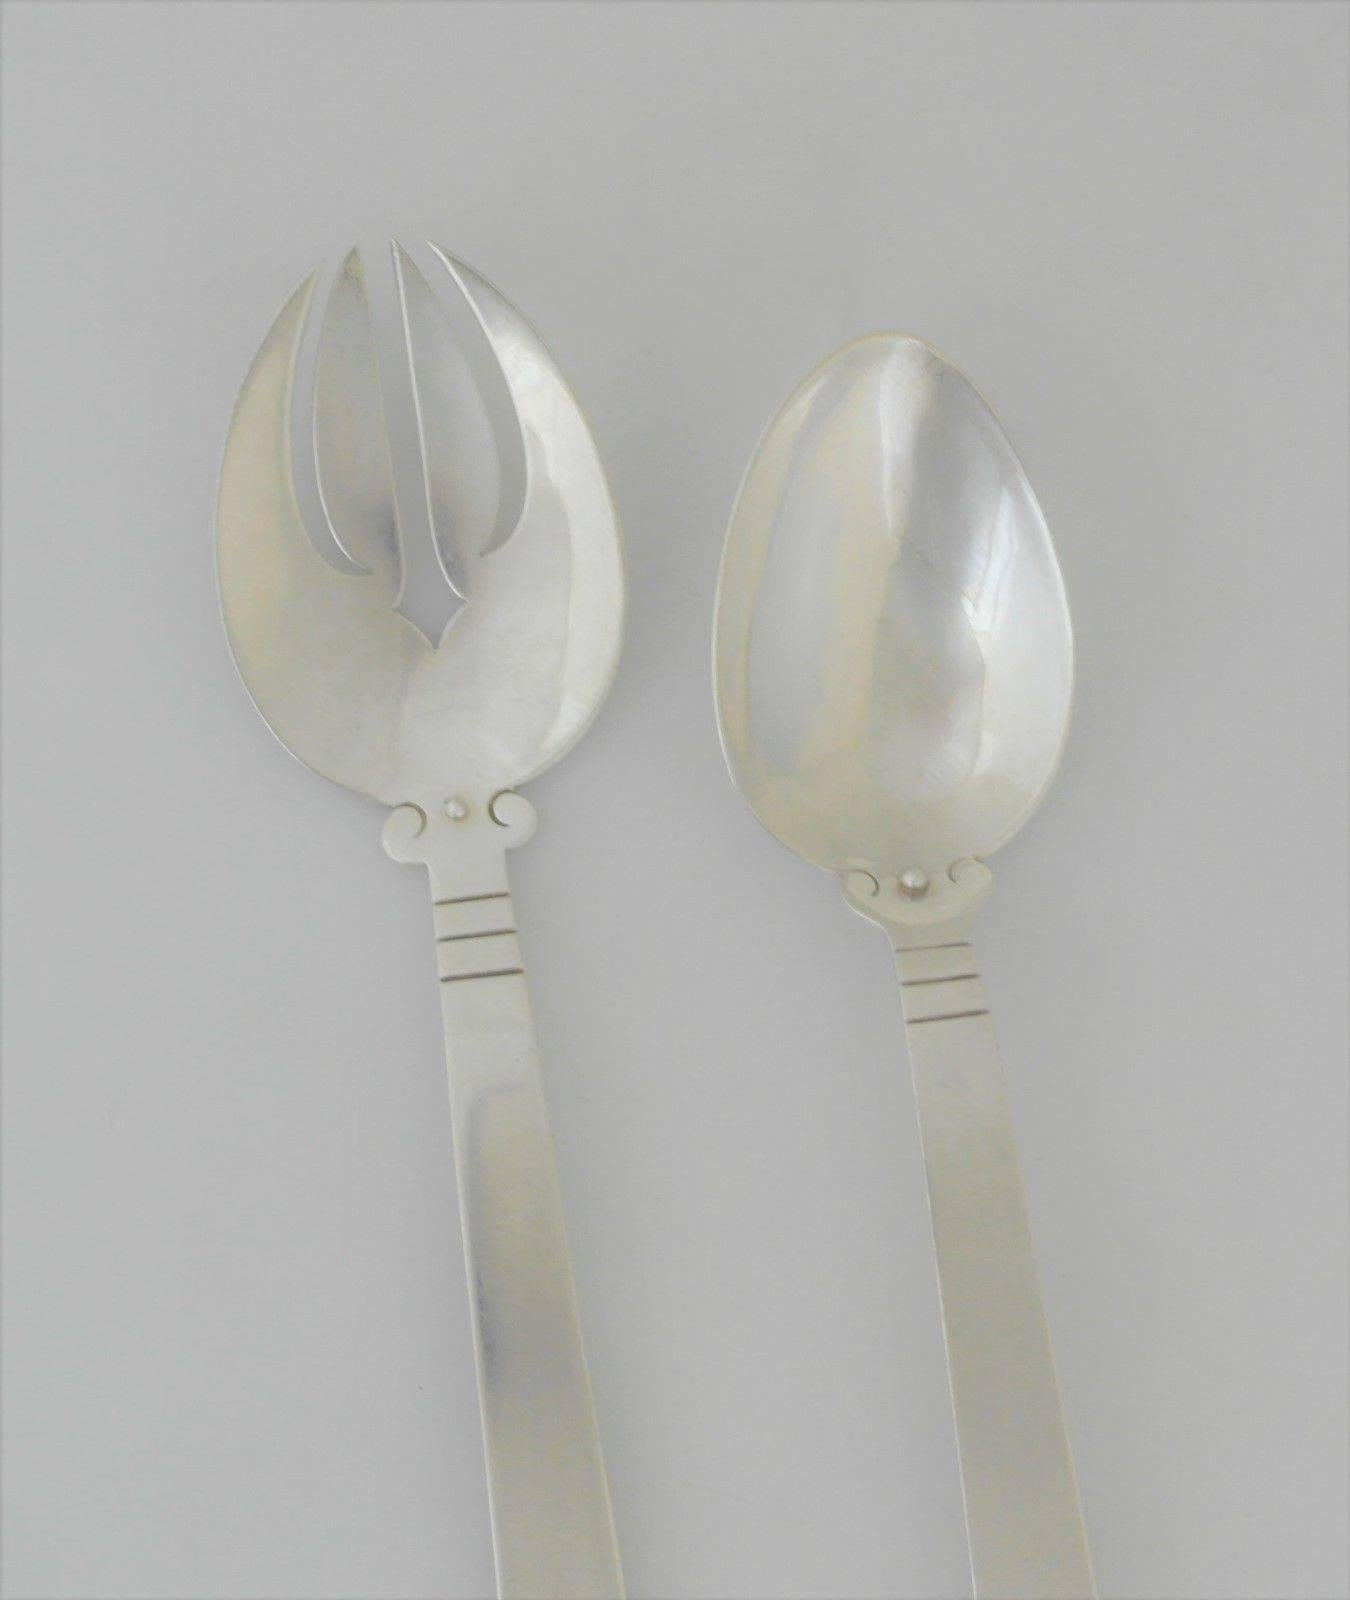 Being offered are a pair of sterling silver salad servers by Hector Aguilar of Taxco, Mexico. In the Aztec pattern. Dimensions: 10 1/4". Marked as illustrated. In excellent condition with normal wear from age and use.